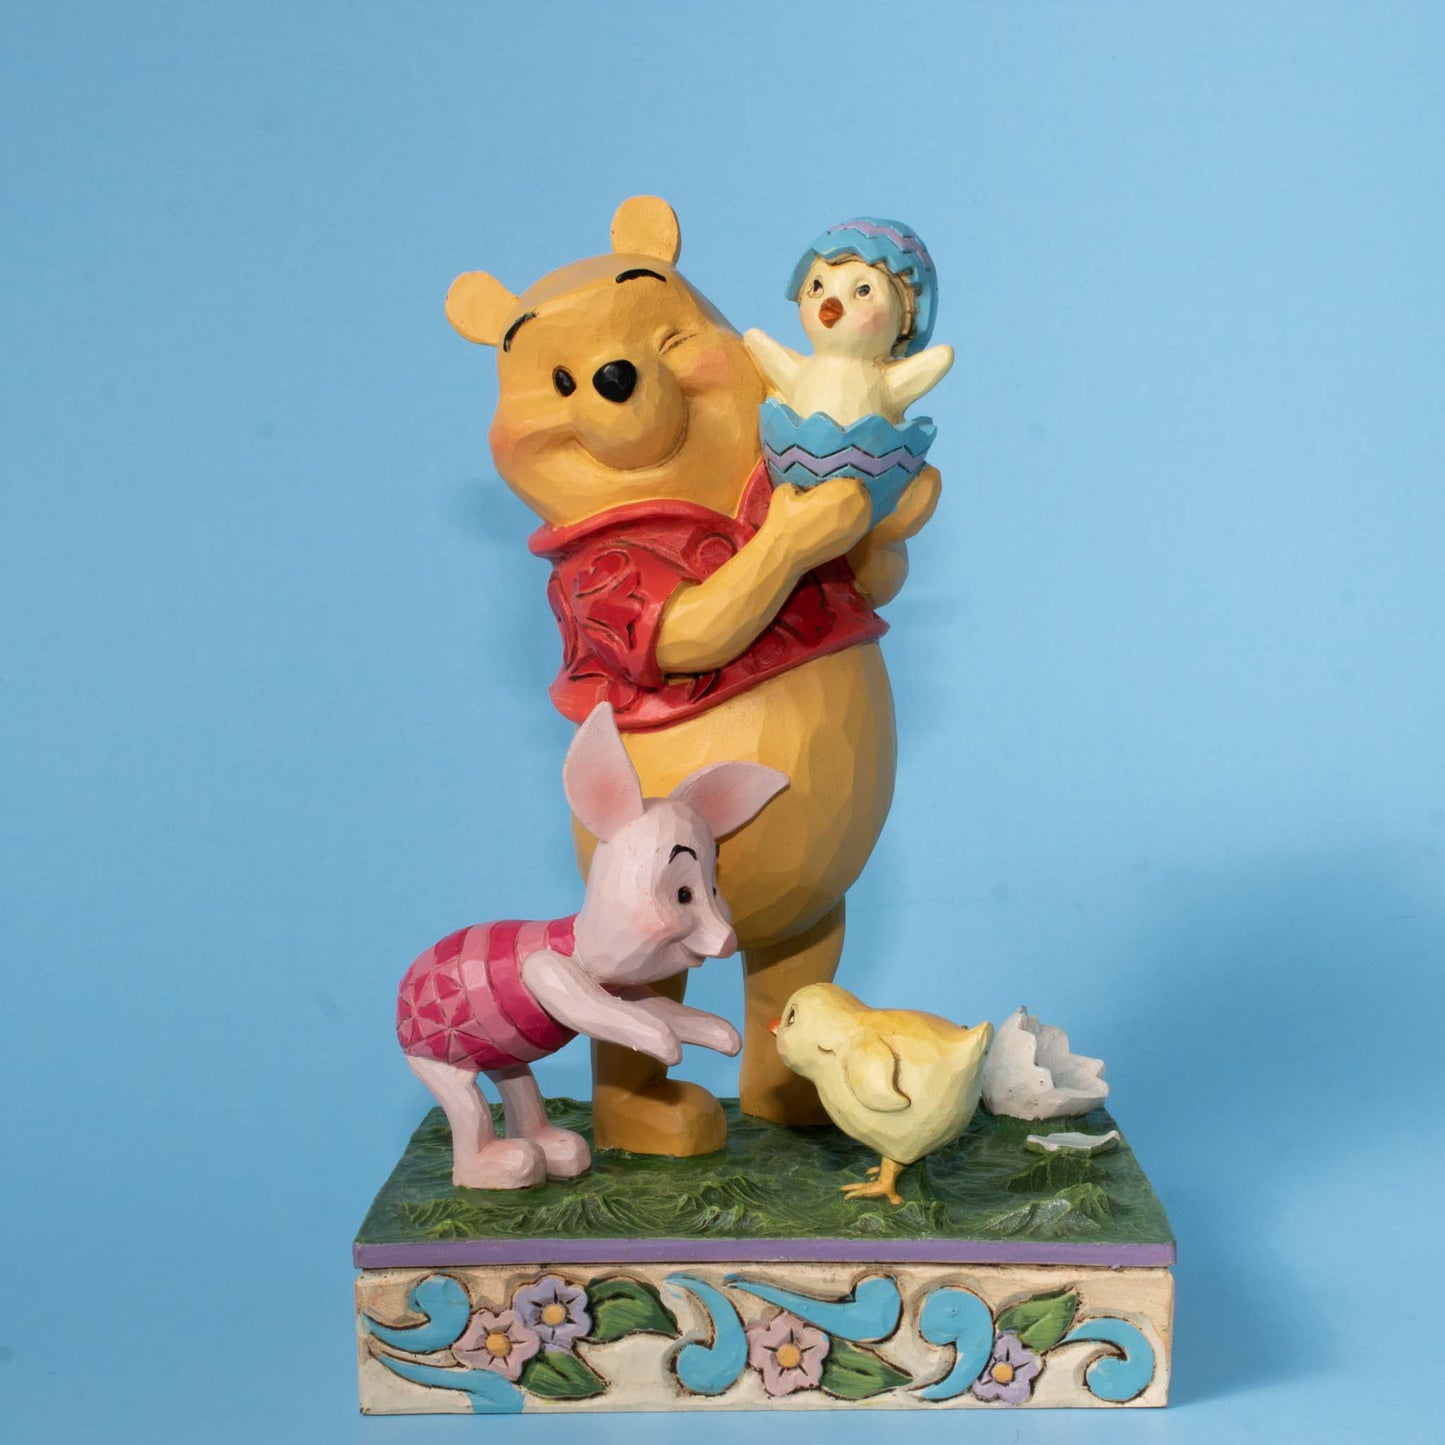 Disney Traditions Pooh Standing Personality Pose Beloved Bear by Jim Shore  Statue